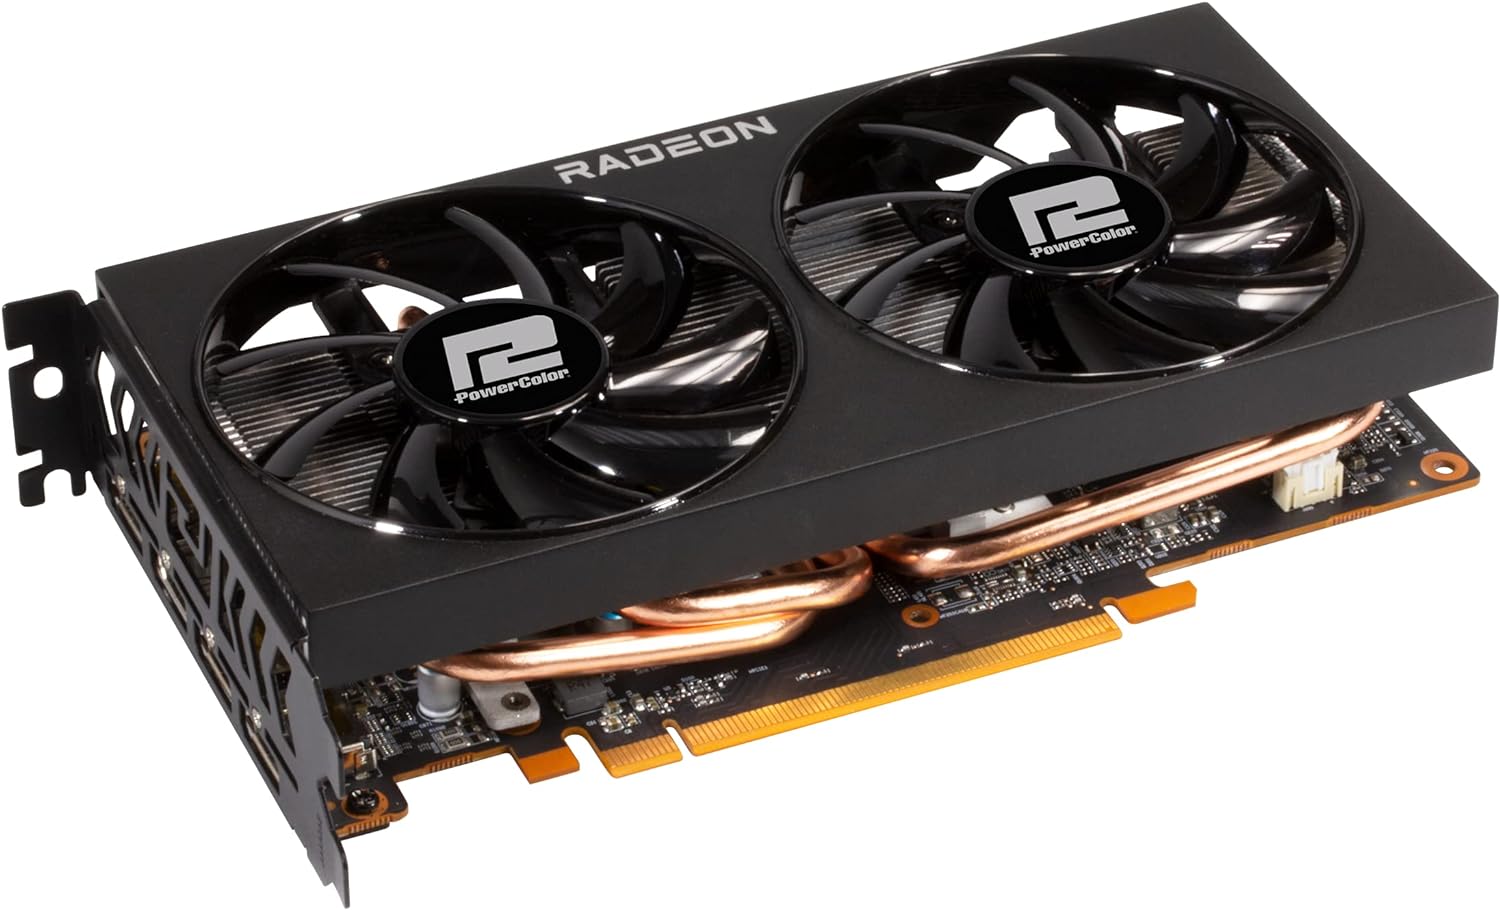 PowerColor Fighter AMD Radeon RX 6600 Graphics Card with 8GB GDDR6 Memory